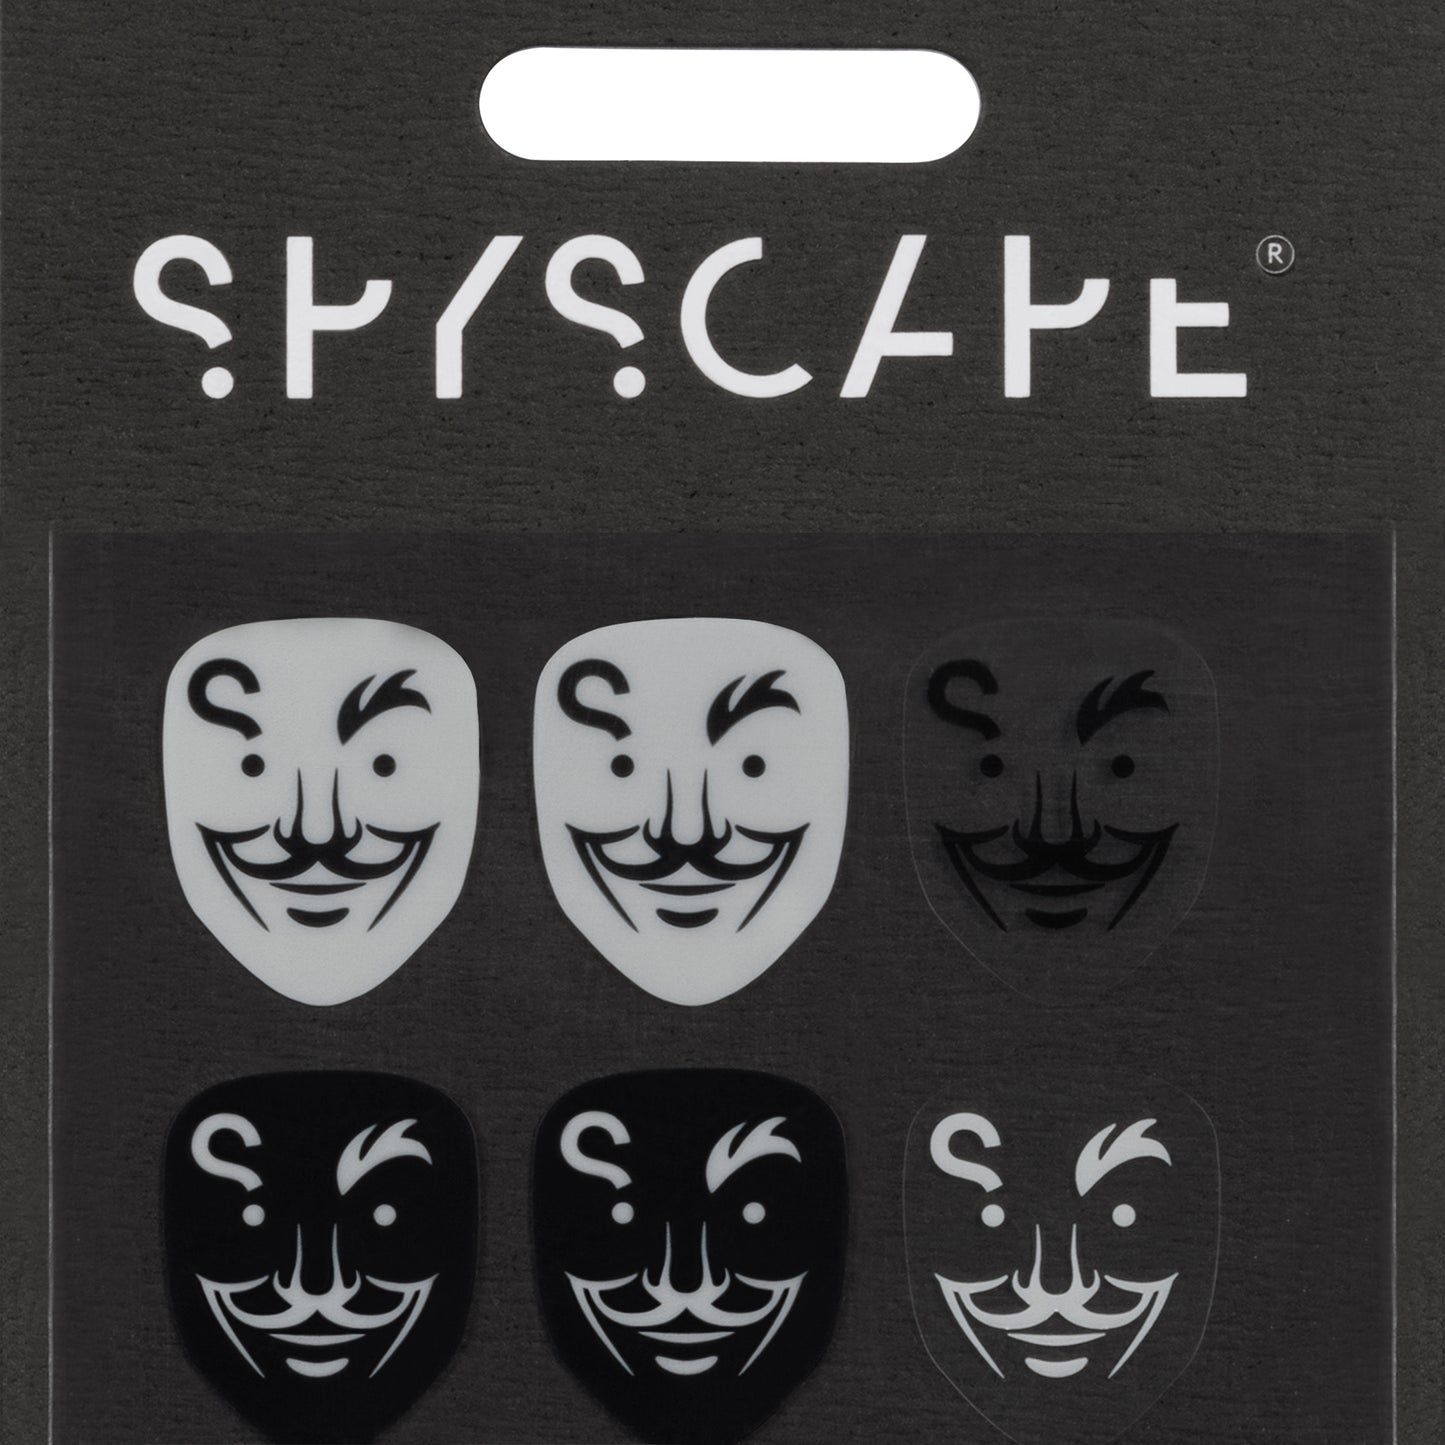 SPYSCAPE Hacker Face Phone Decal Set - 